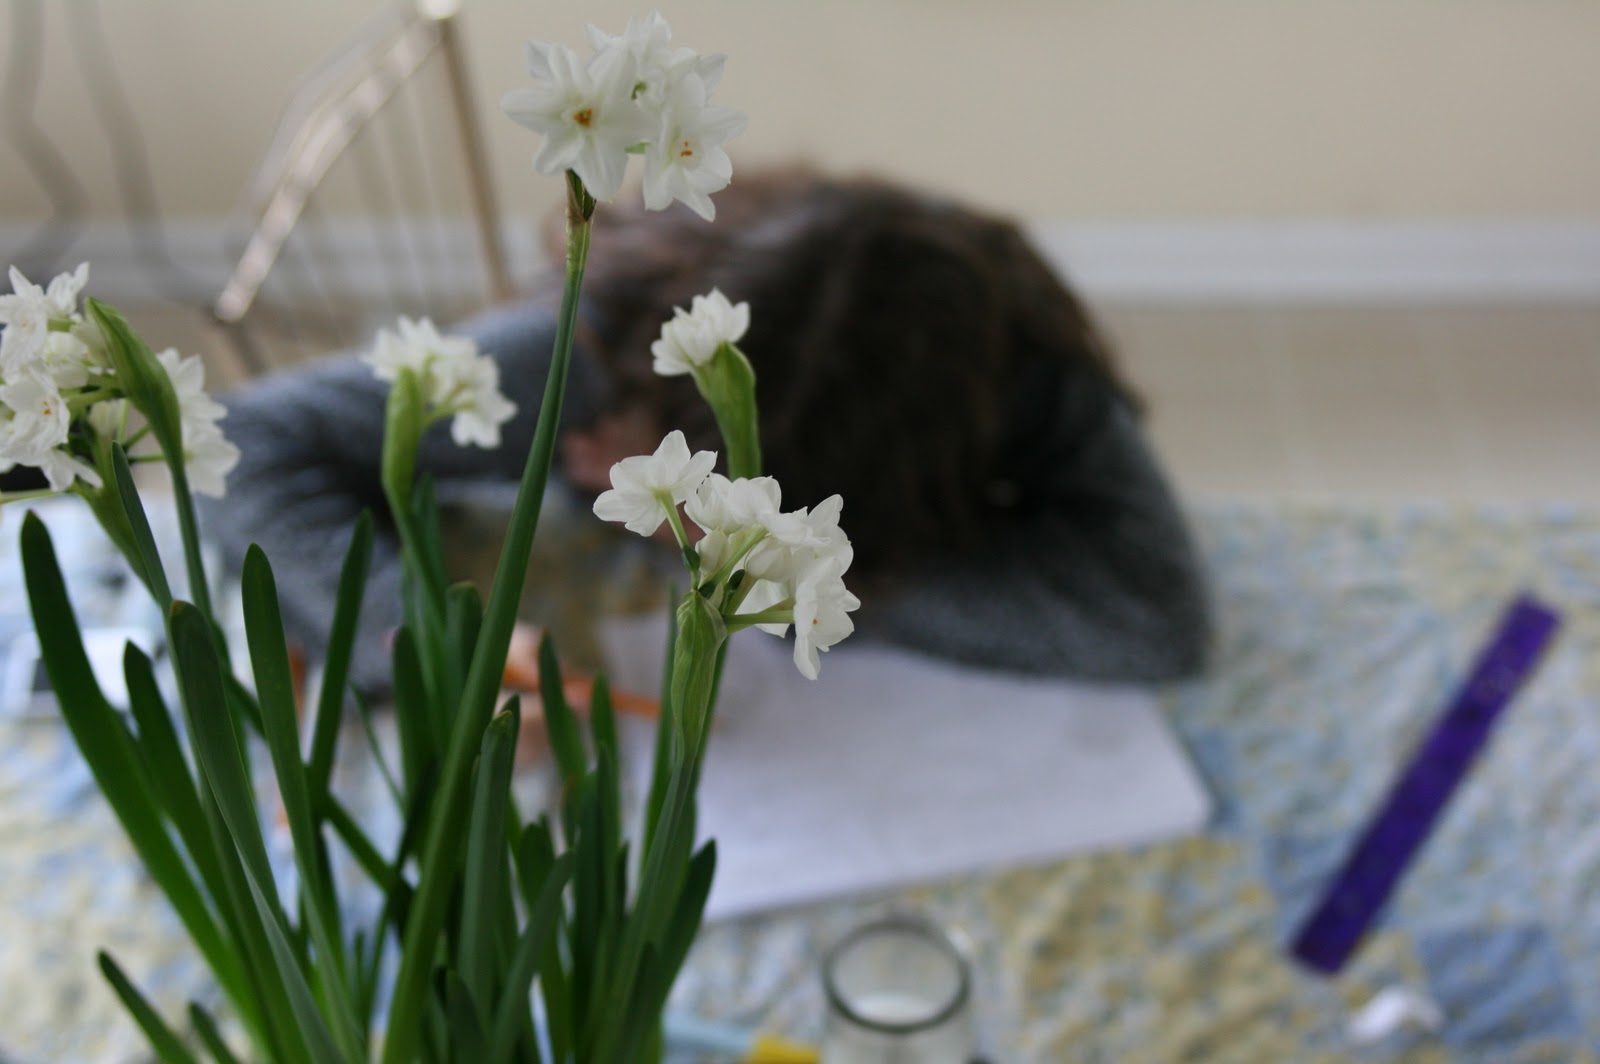 White narcissus on a table